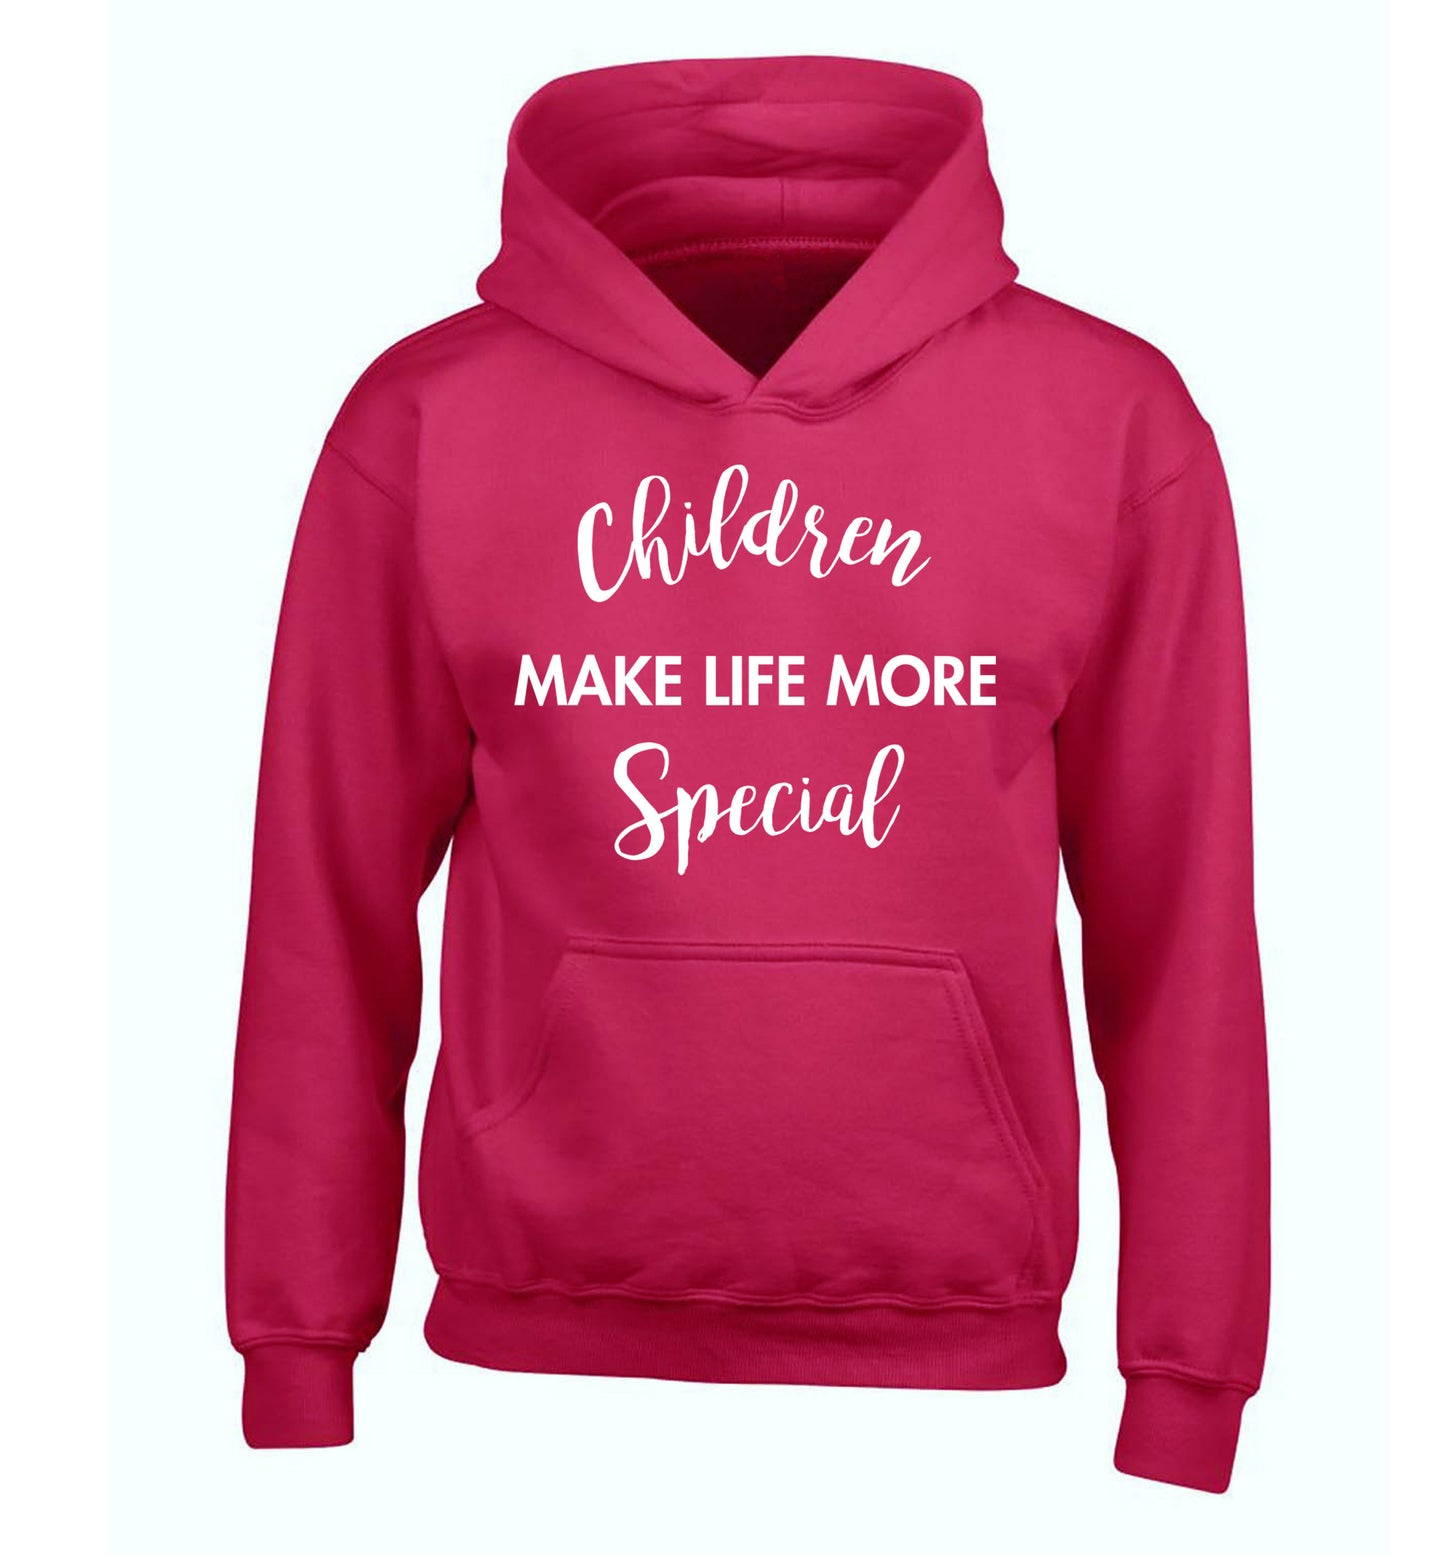 Children make life more special children's pink hoodie 12-14 Years